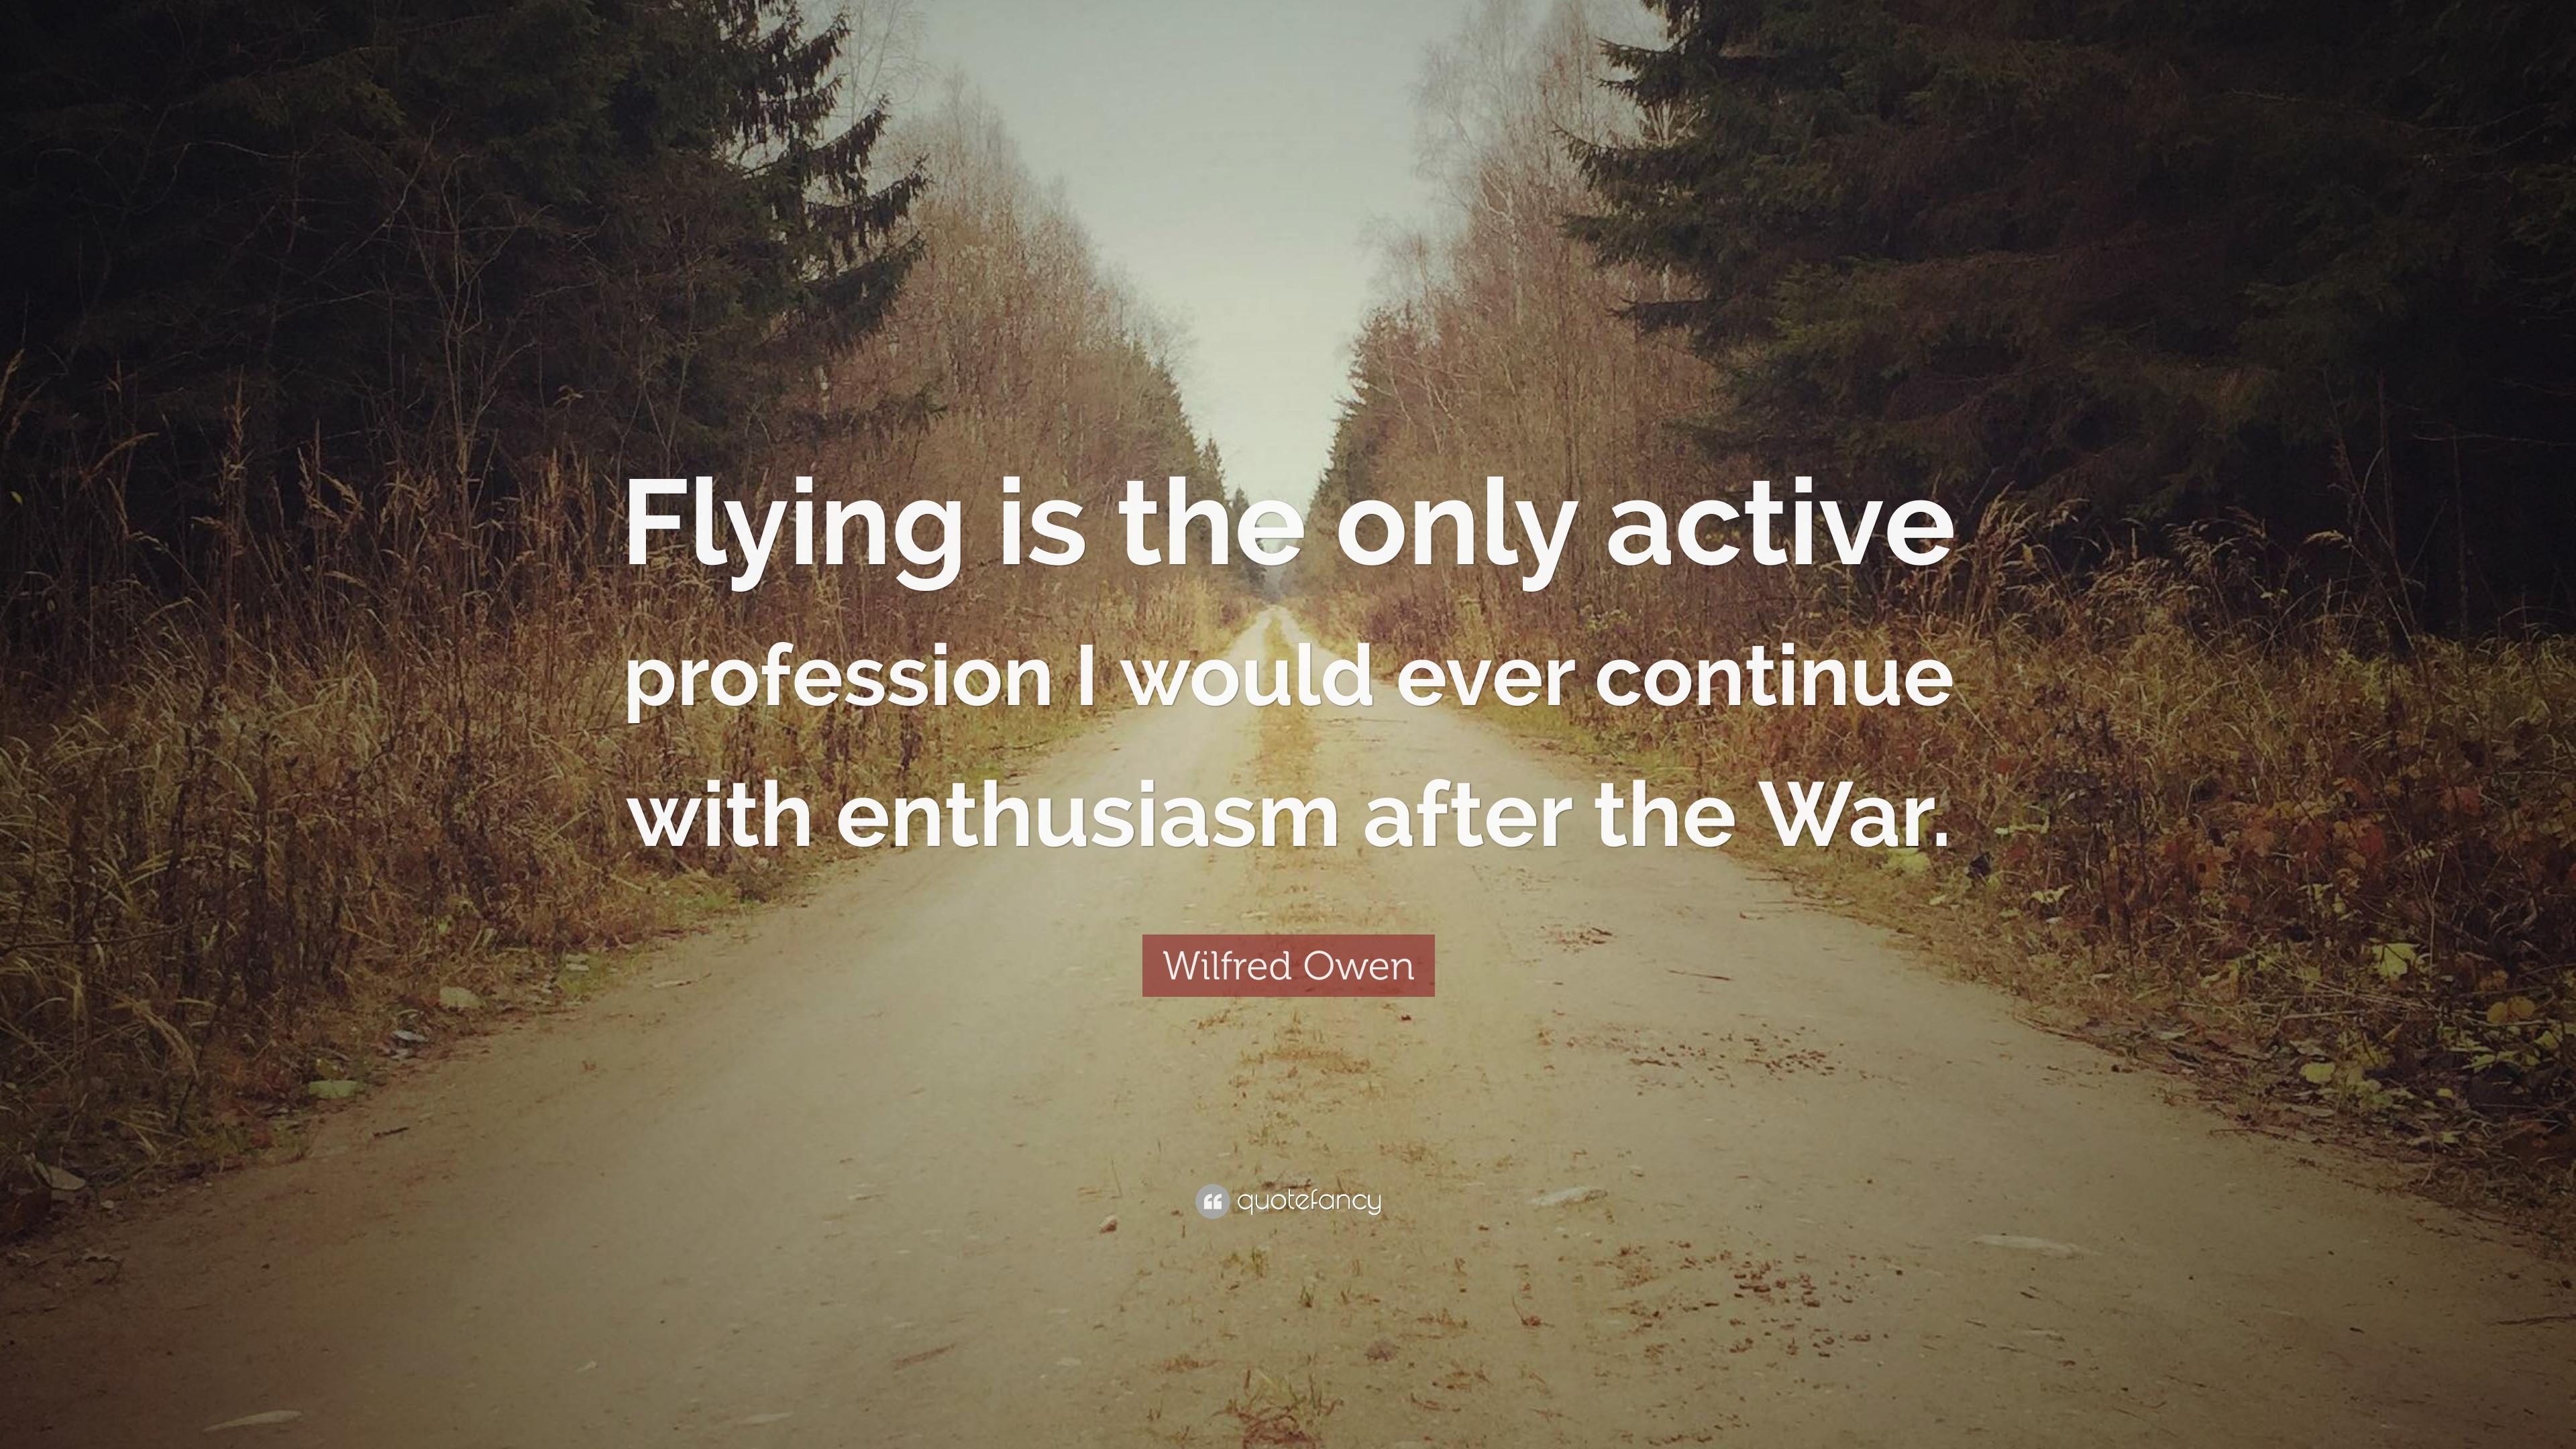 Wilfred Owen Quote: “Flying is the only active profession I would ever ...